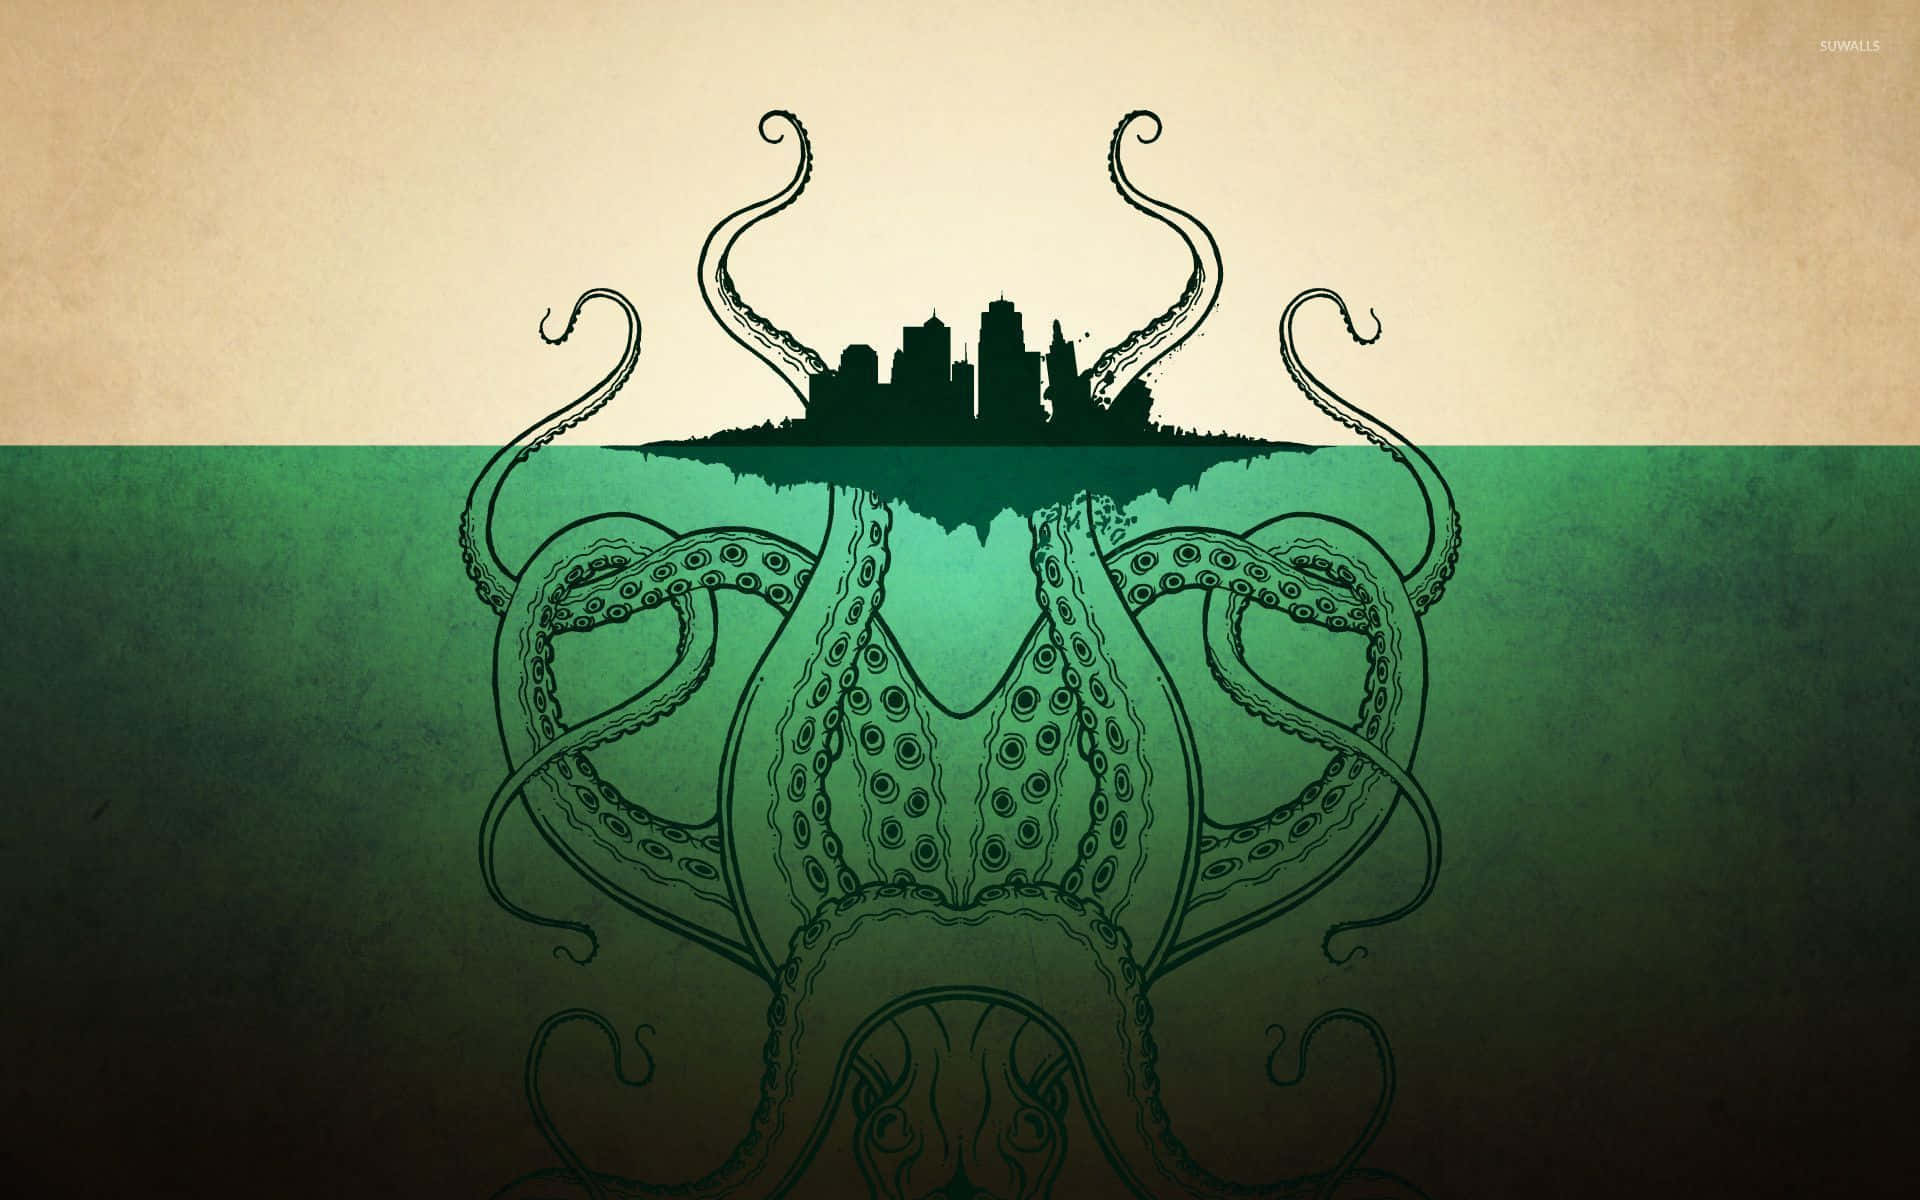 A City With Octopus Tentacles And A City